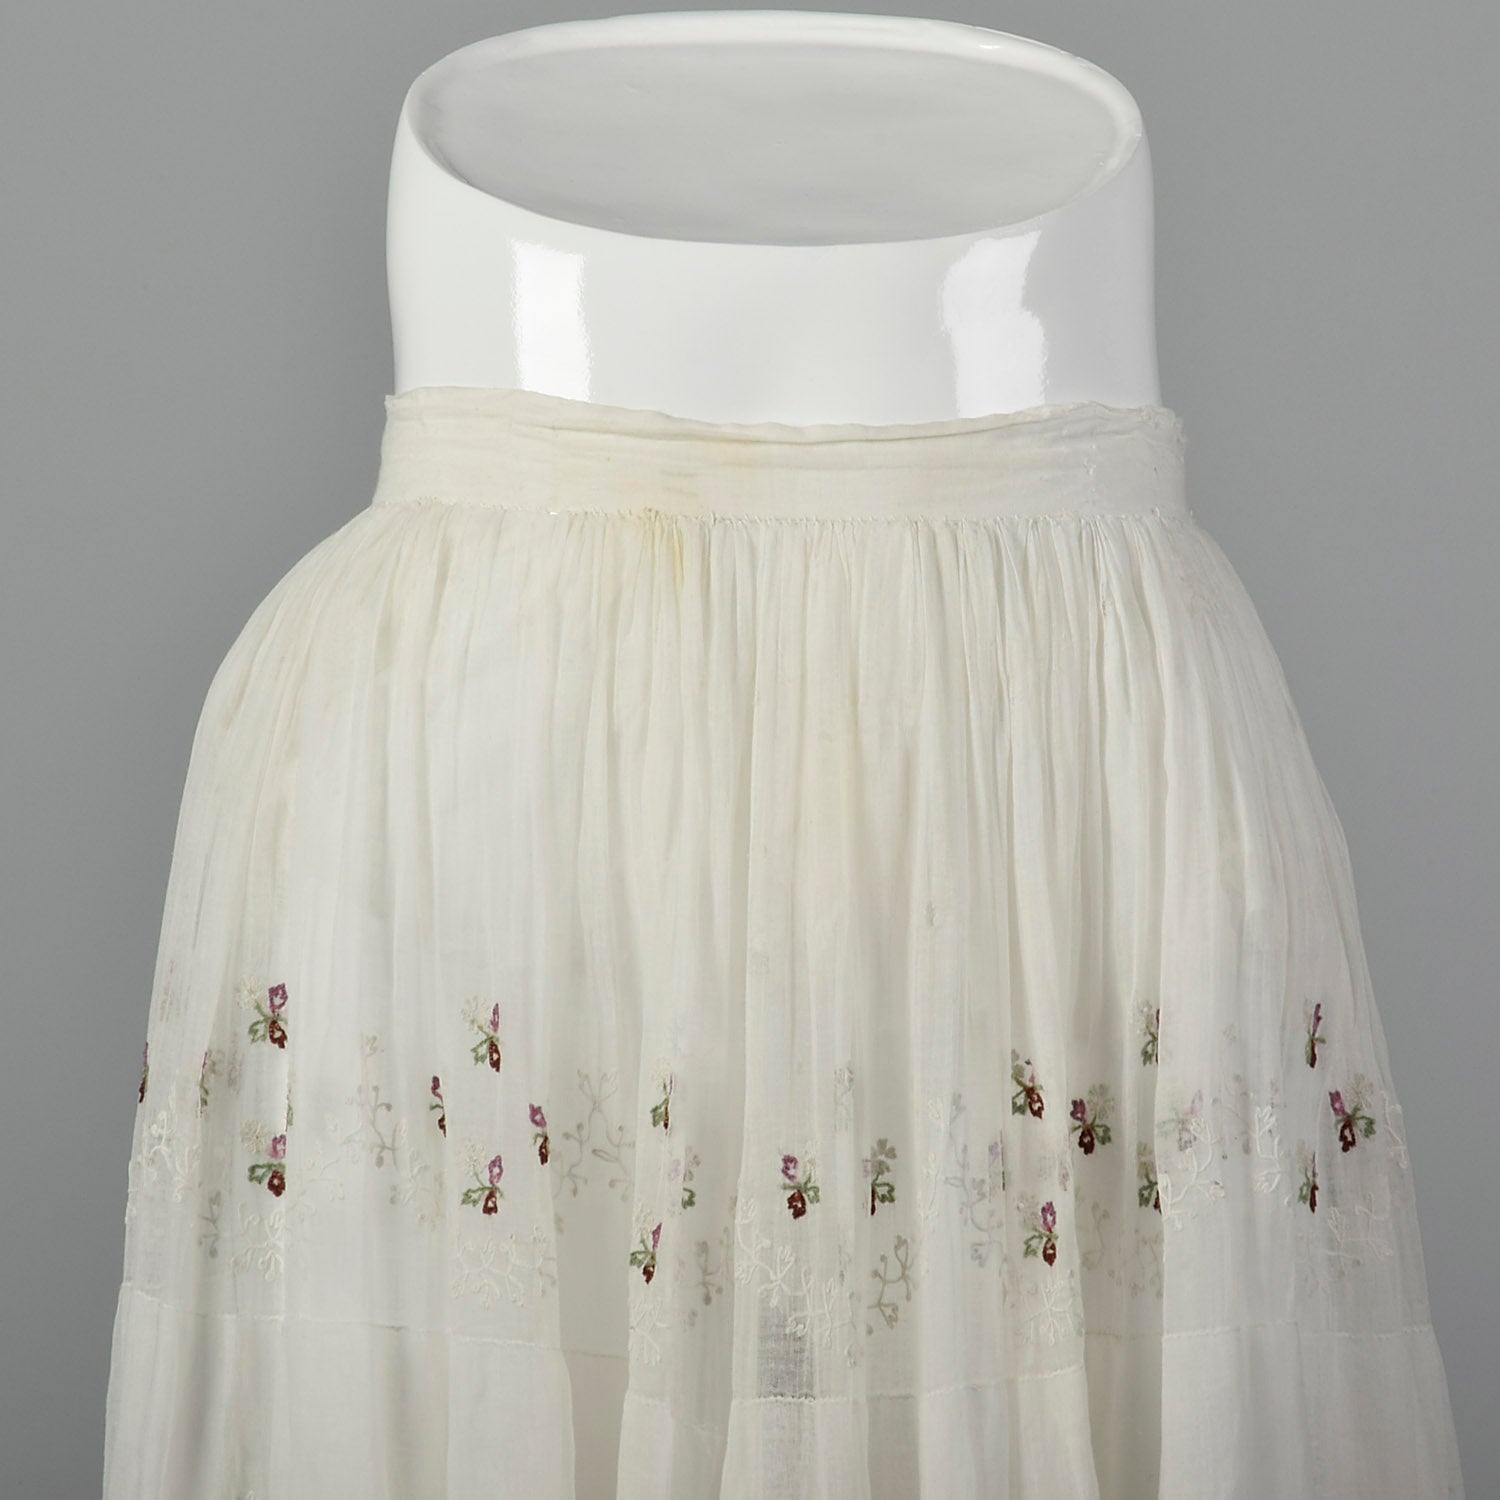 Large 1860s Tiered Embroidered Skirt